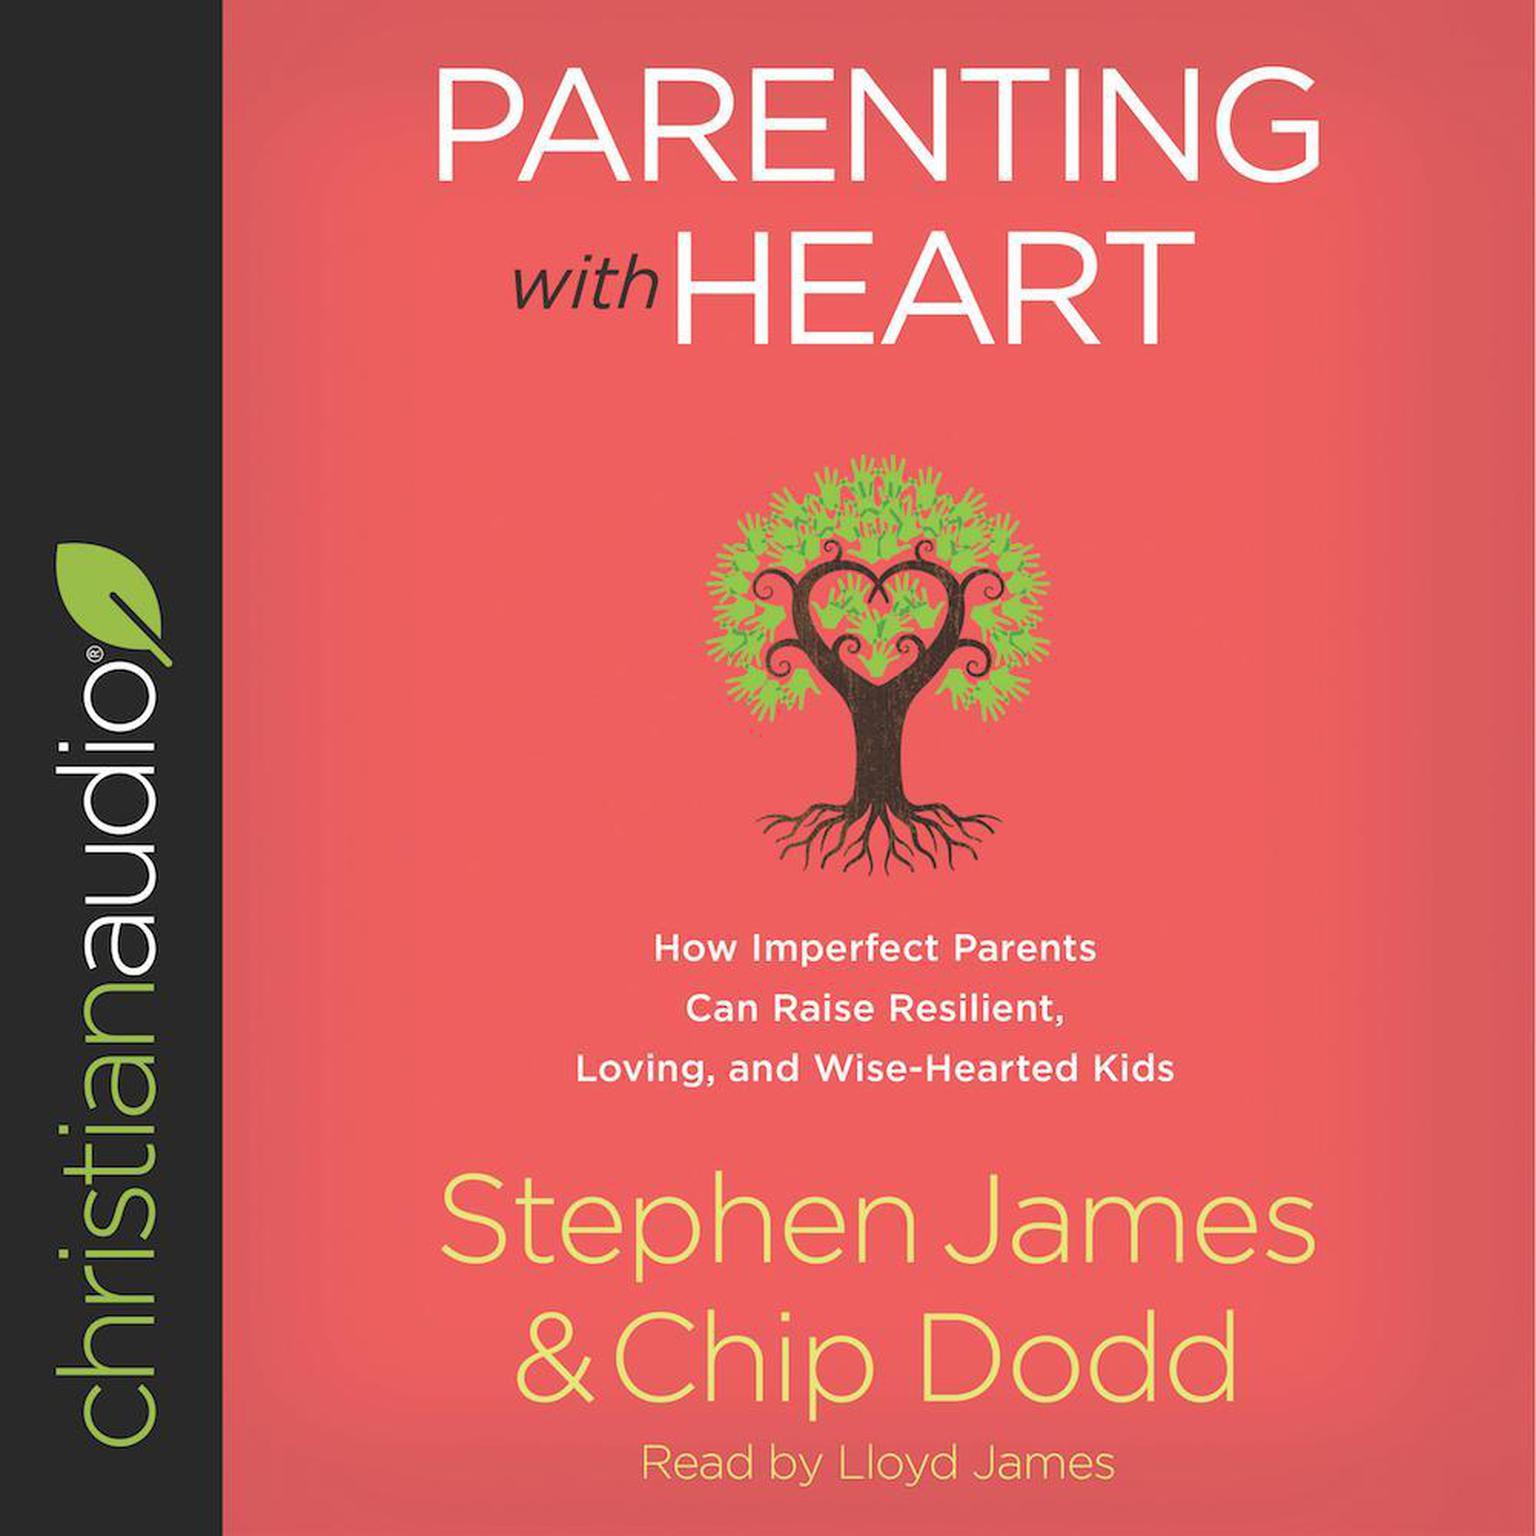 Parenting with Heart: How Imperfect Parents Can Raise Resilient, Loving, and Wise-Hearted Kids Audiobook, by Stephen James